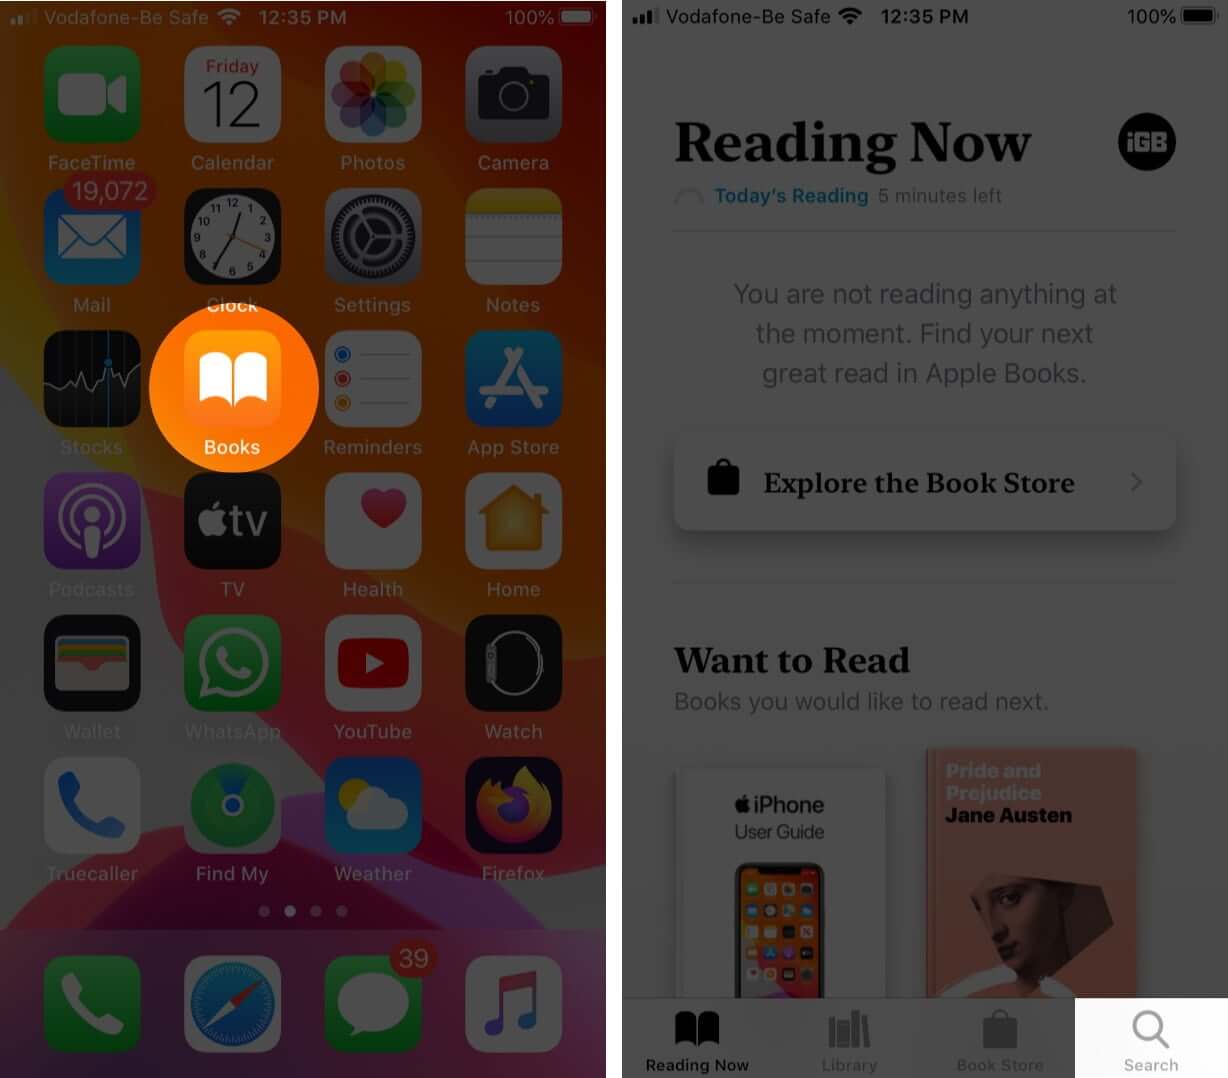 open books app and tap on search from bottom of the screen on iphone